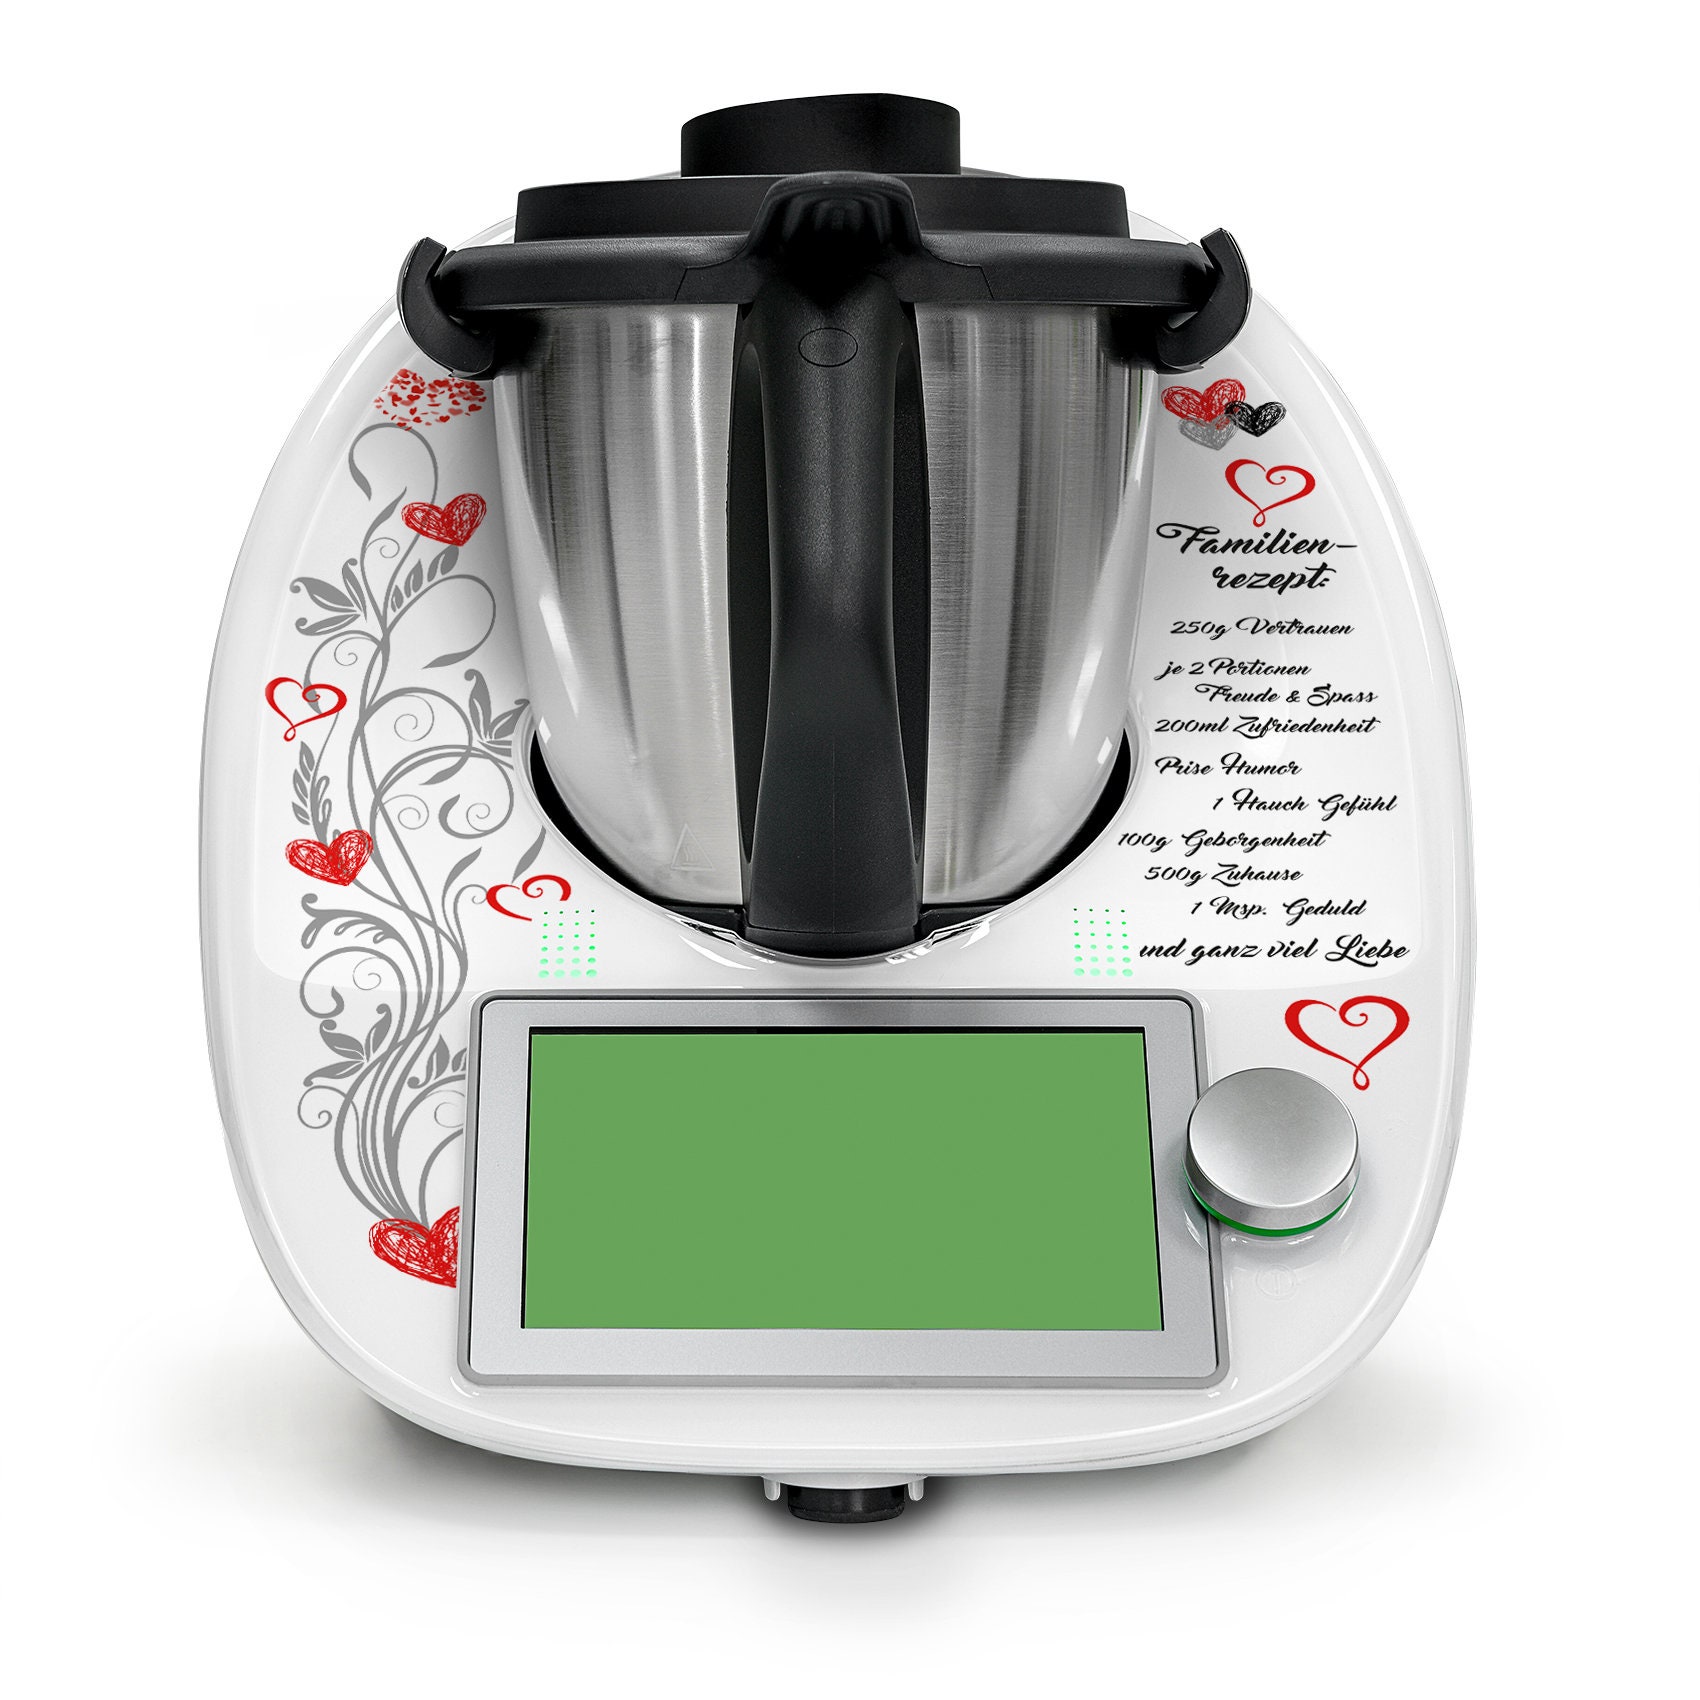 Thermomix TM6 Review: One Kitchen Gadget to Rule Them All